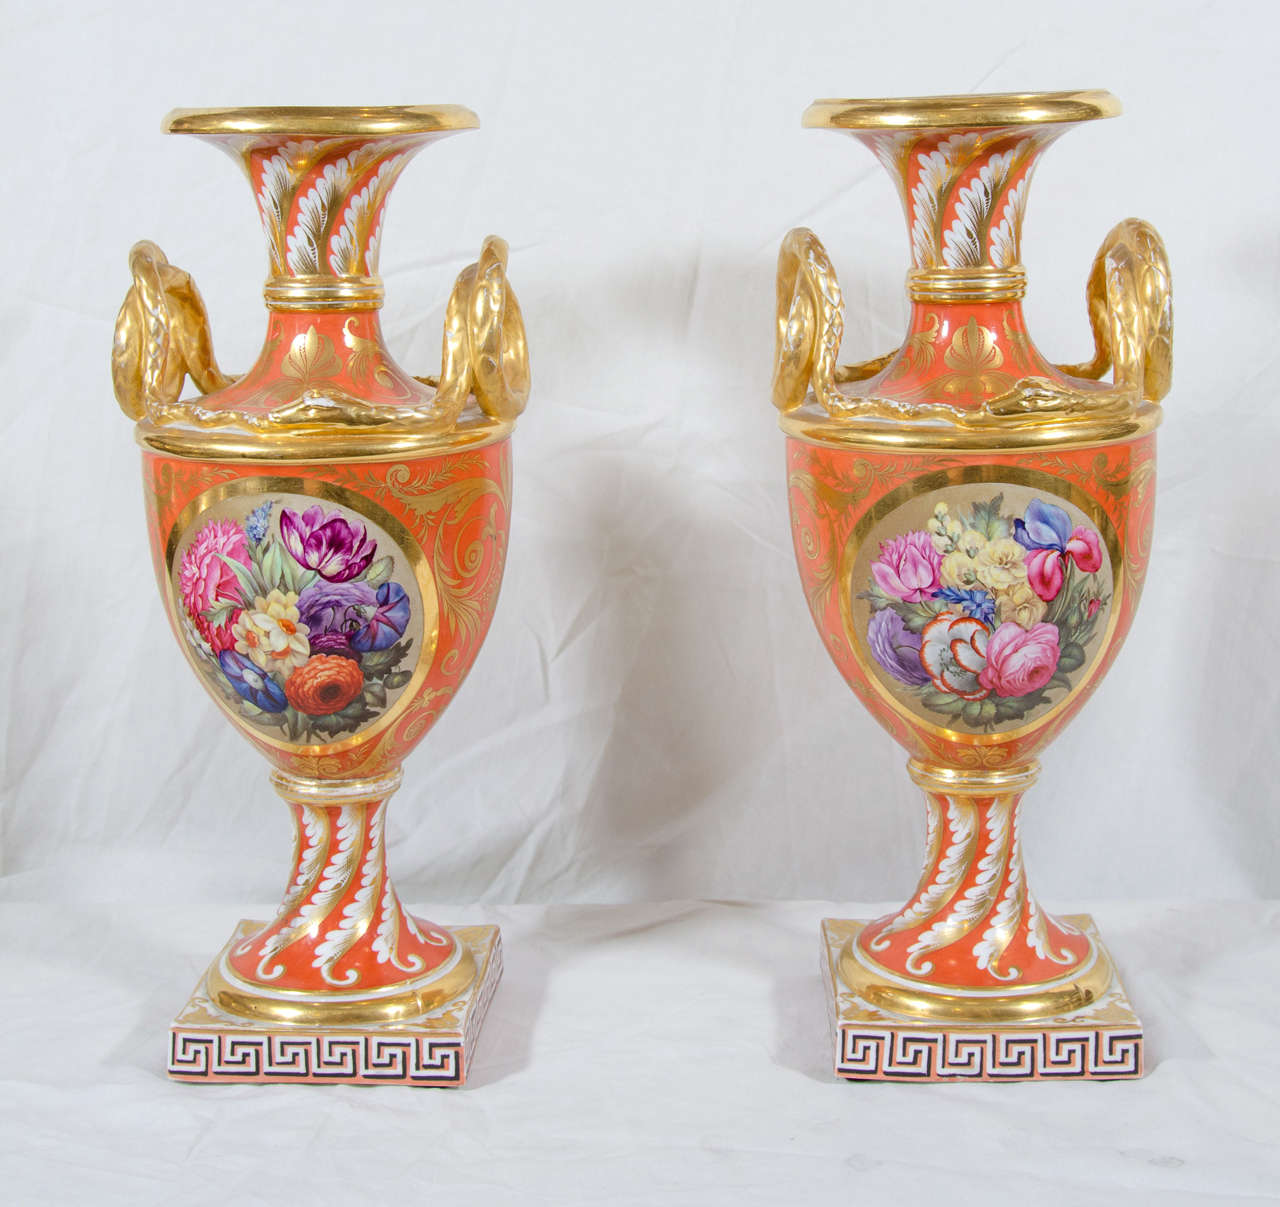 It is rare to find a pair of vases that has so many outstanding elements of Regency style, exquisite execution of finely painted flowers with an unexpected use of pink, blue and violet against a strong orange ground, beautifully gilded snake